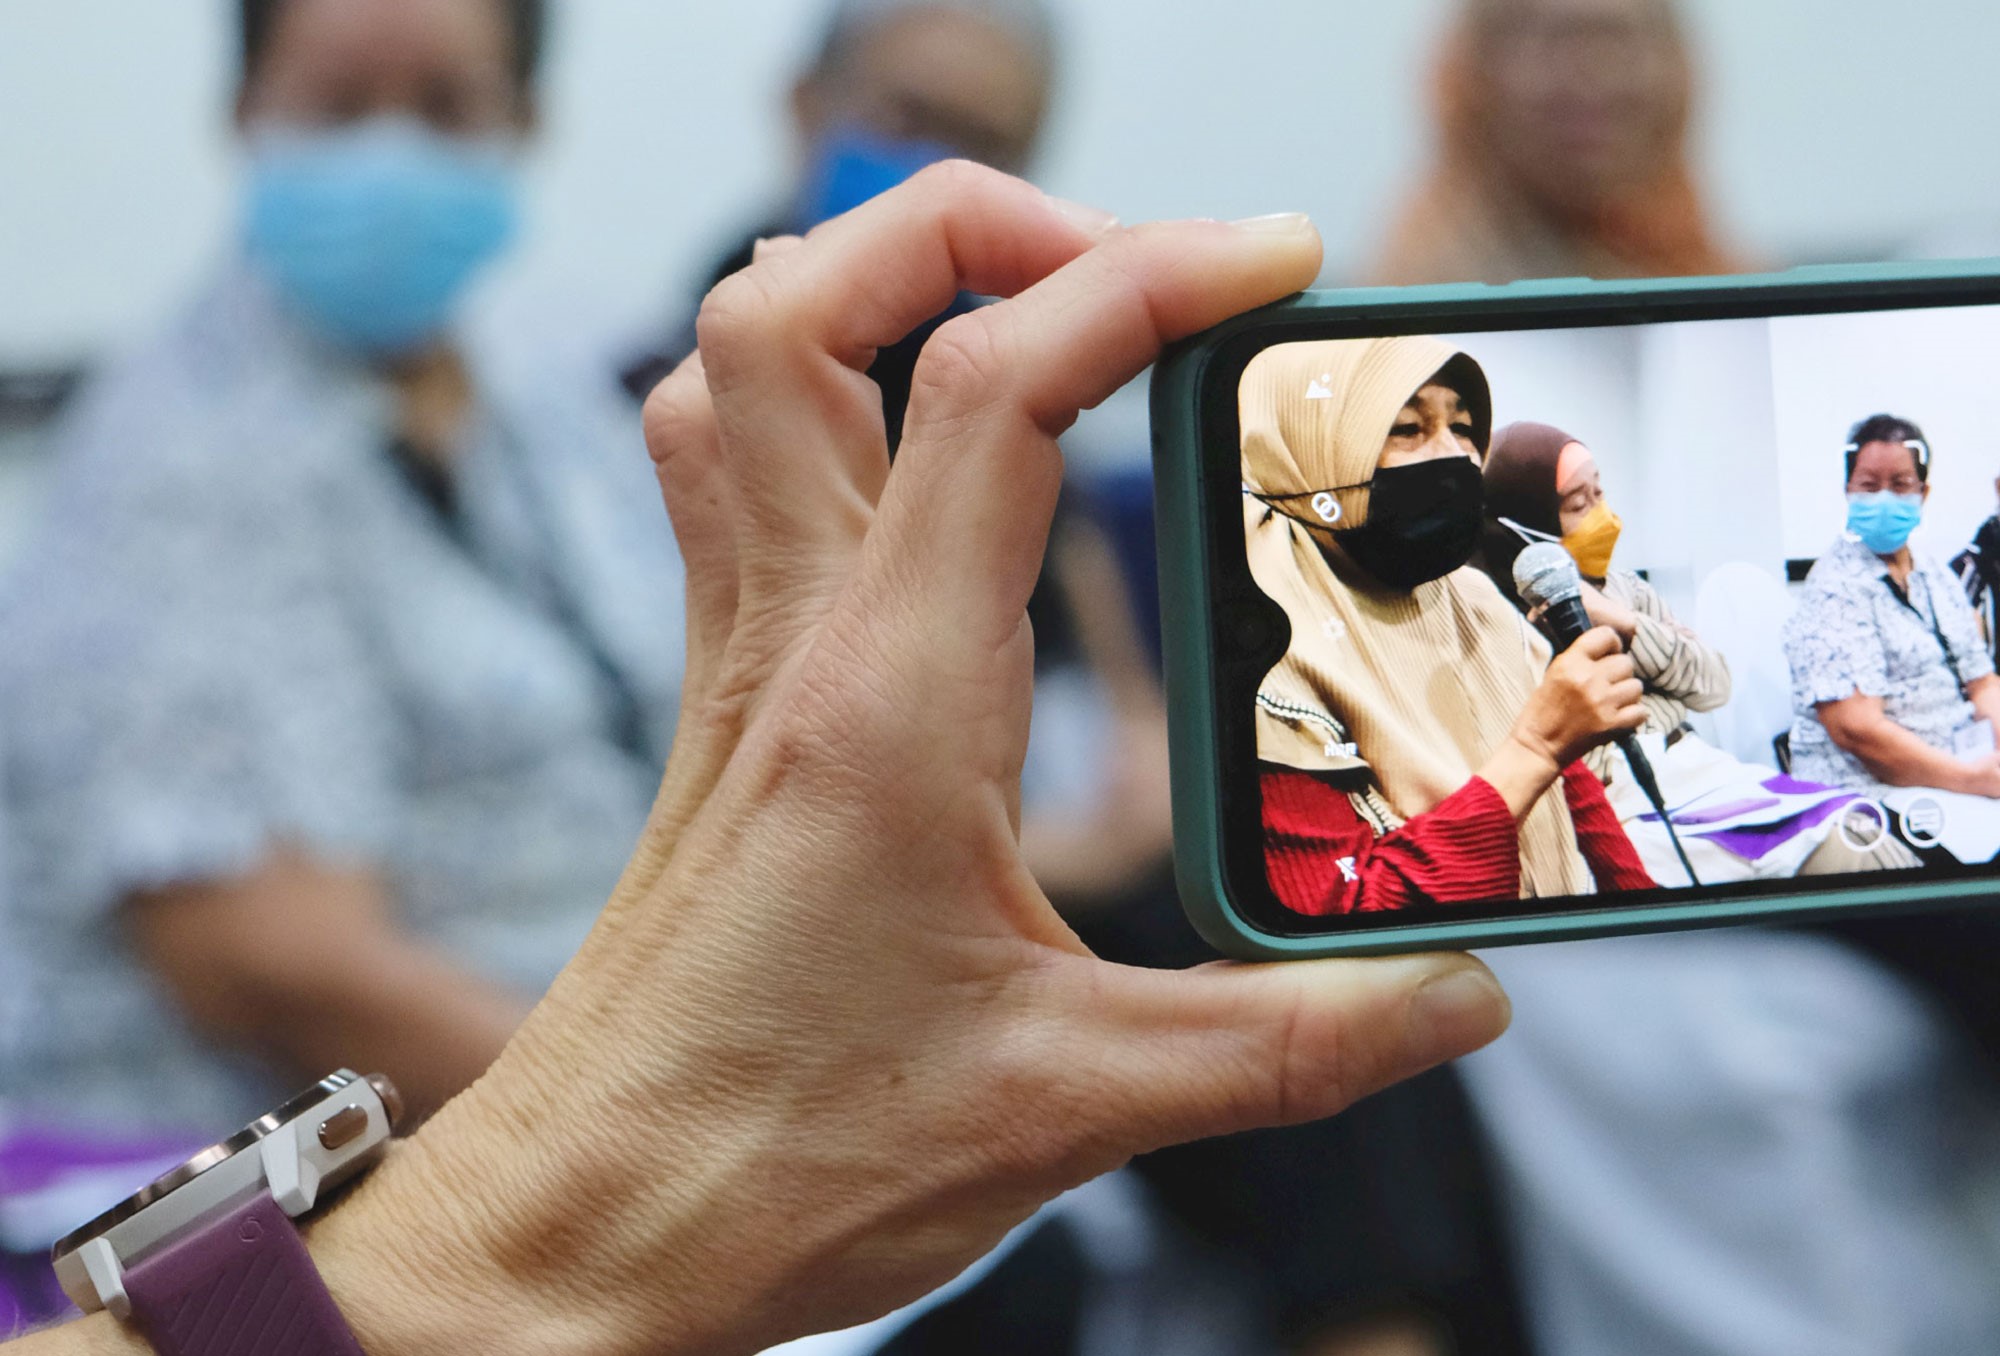 A hand is holding a mobile phone on which a photo of a group of women in the Philippines can be seen.